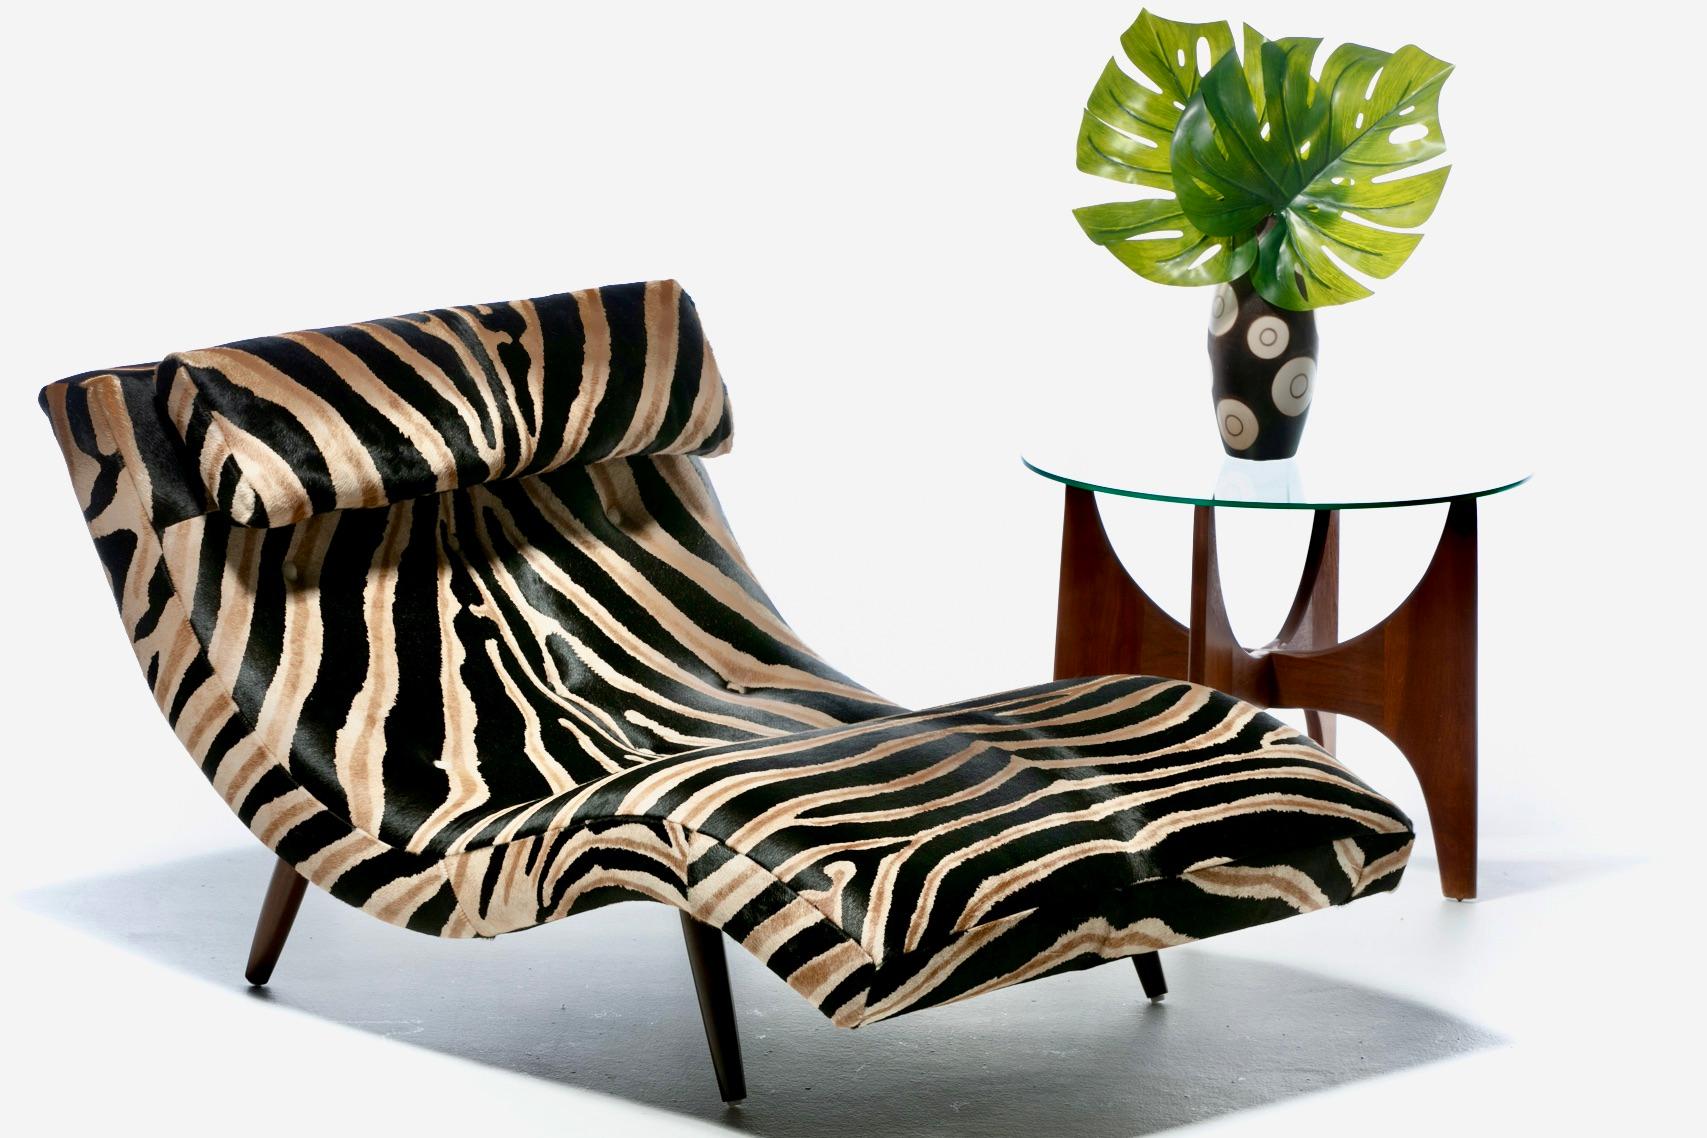 One look and you'll be hooked on this drop dead gorgeous Mid-Century Modern wave chaise by none other than famed designer Adrian Pearsall freshly reupholstered in rich zebra stamped cowhides. Without a doubt, Adrian Pearsall is the master of the mid